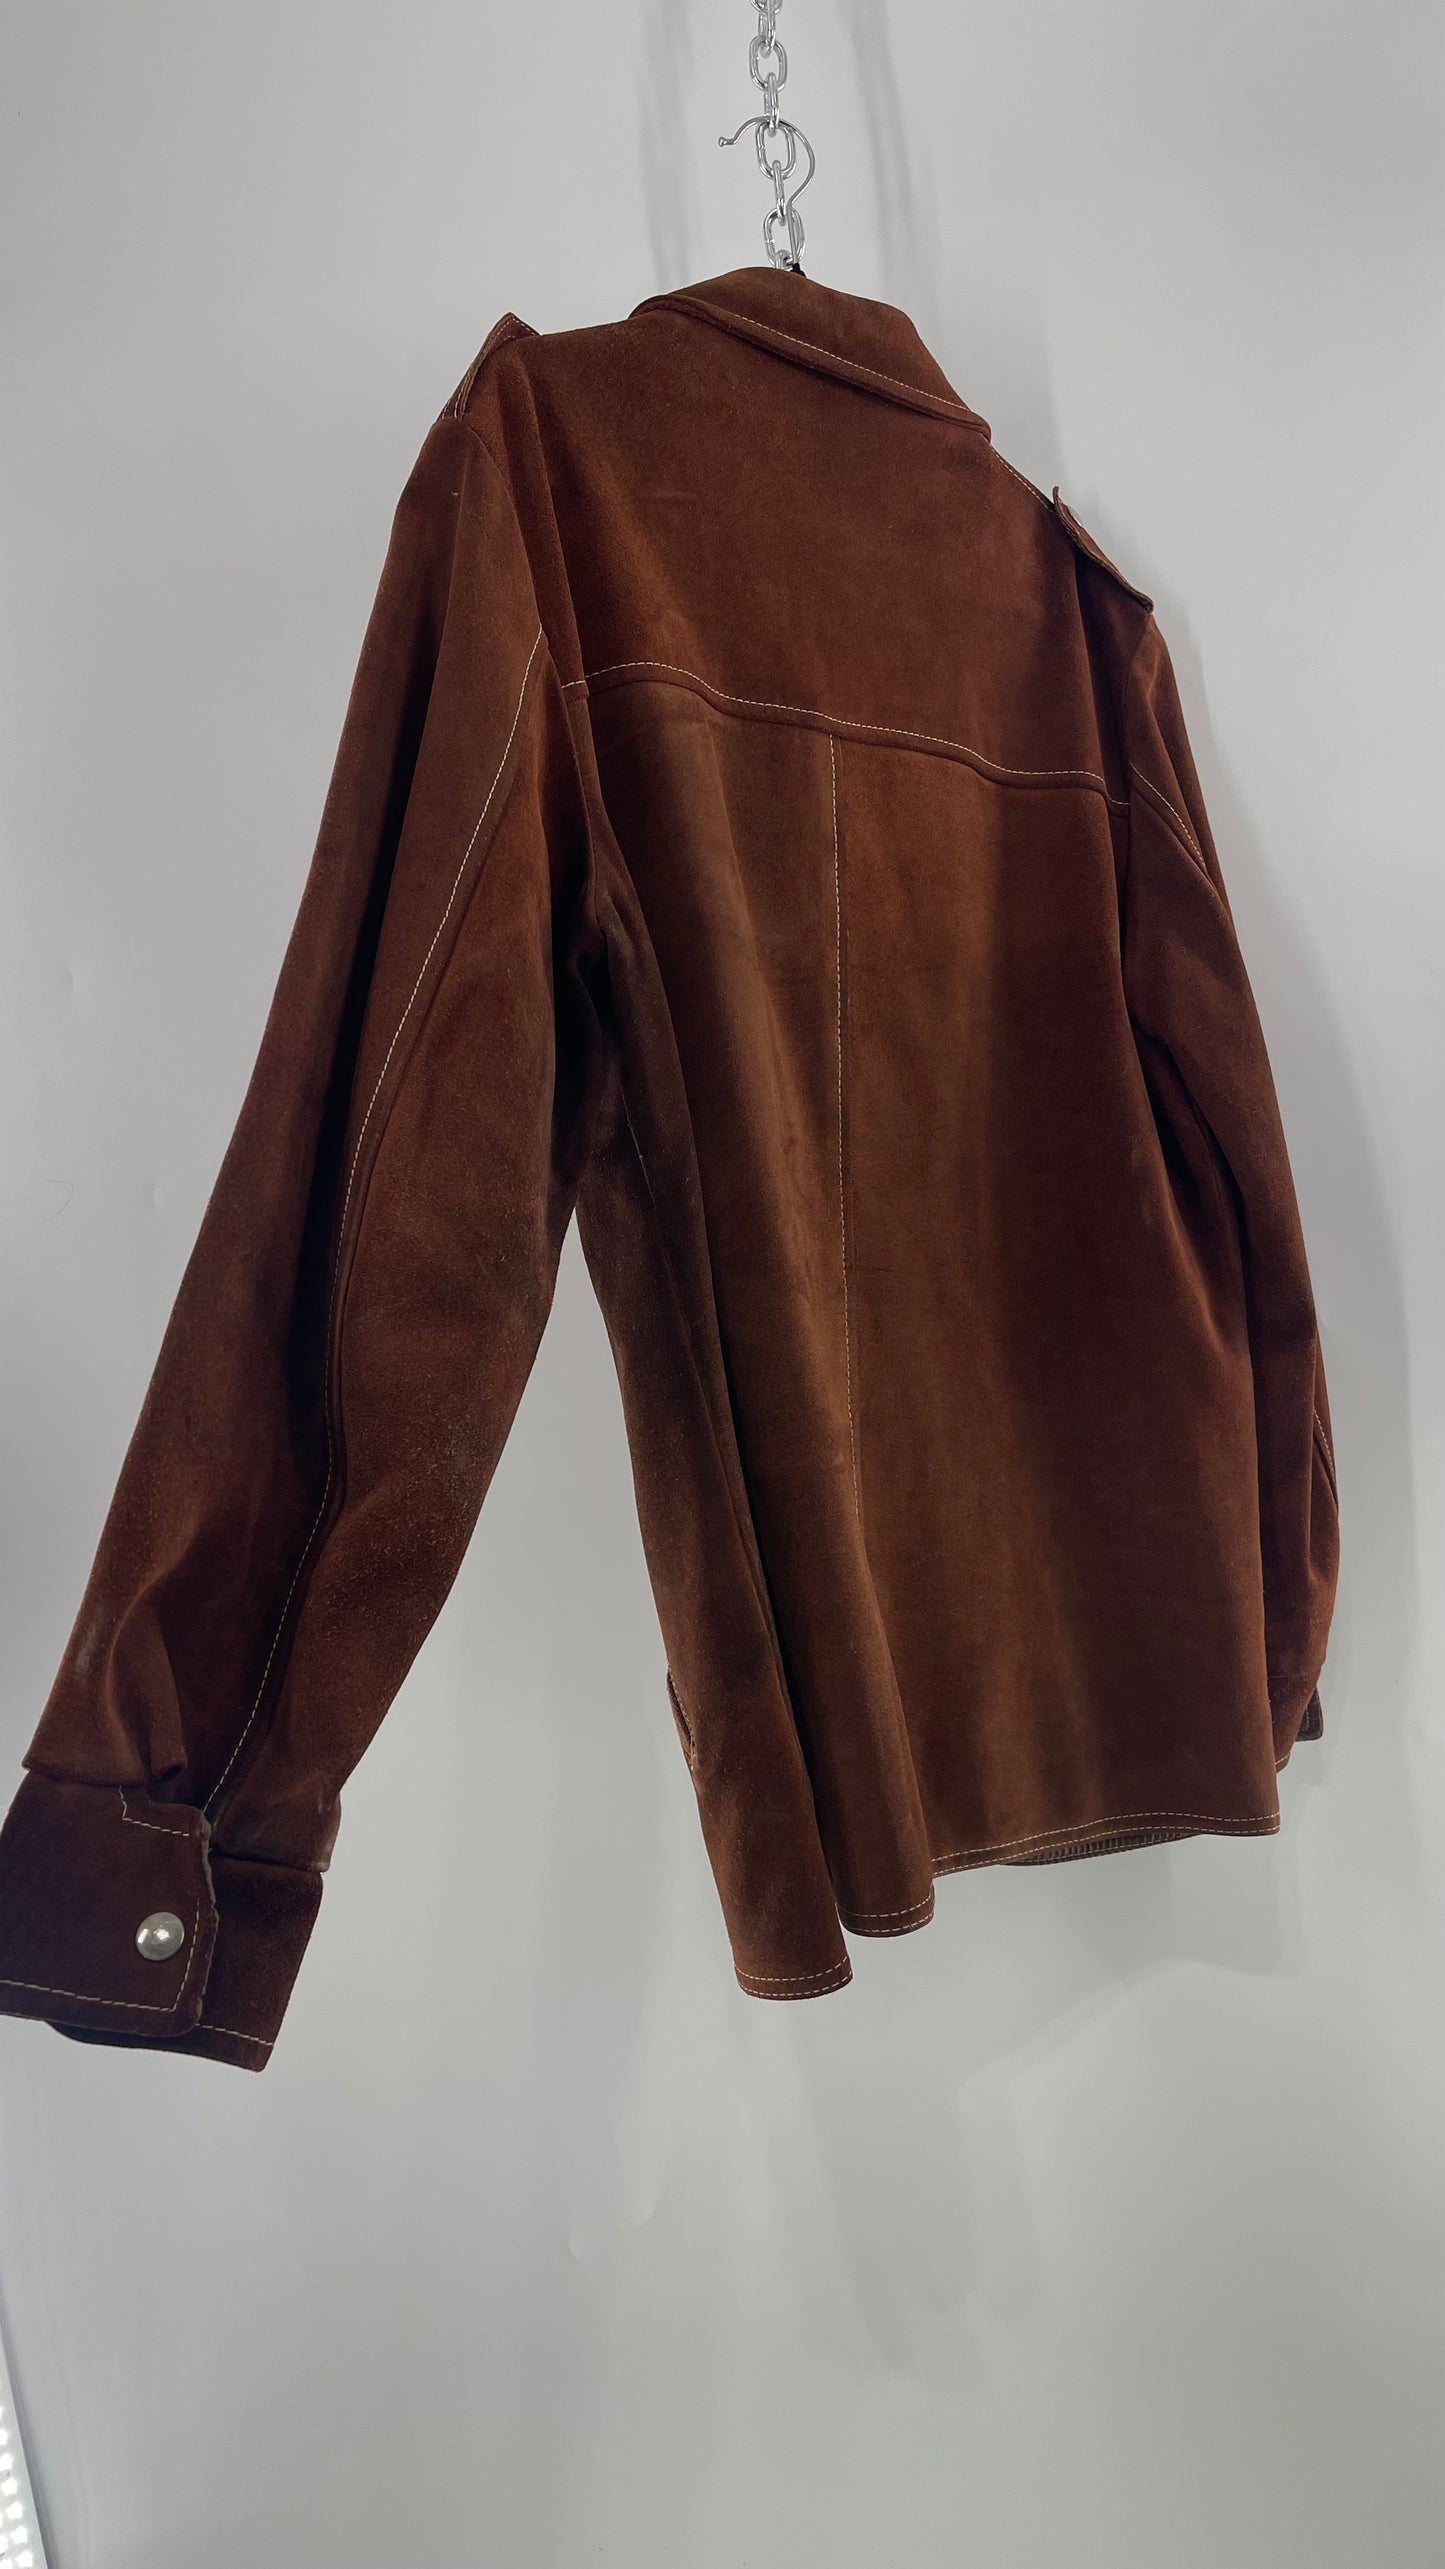 Vintage Brown Suede Jacket with Contrast White Stitching  (C)(Large)